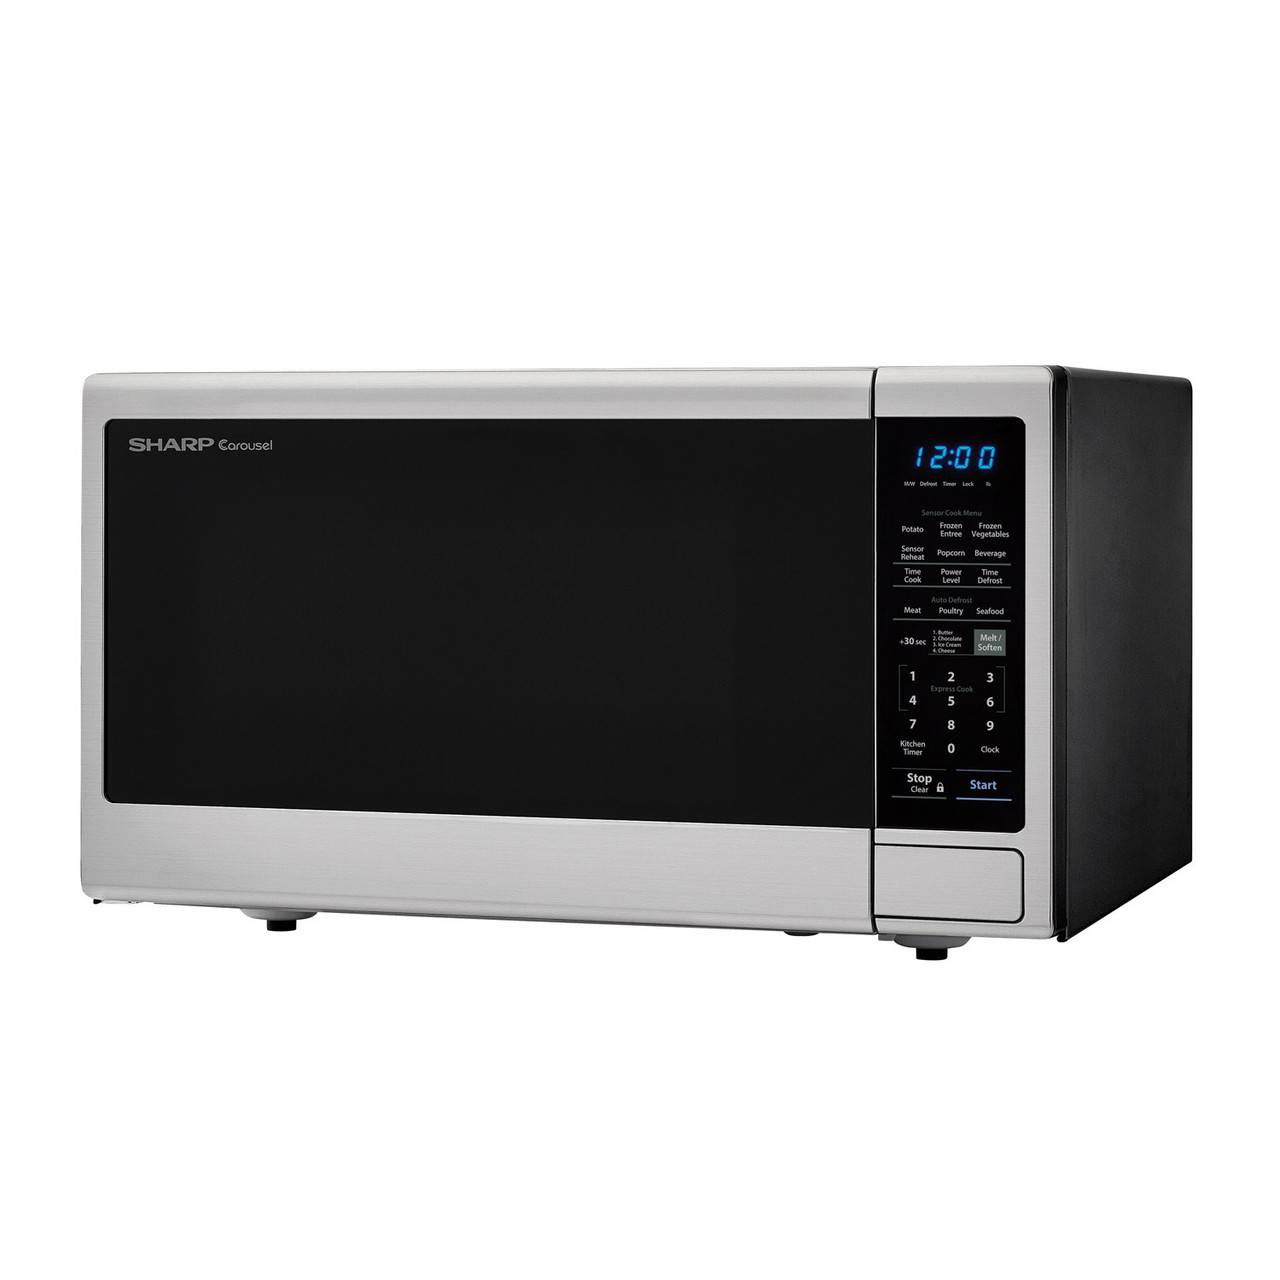 1.8 cu. ft. Sharp Stainless Steel Microwave with Black Mirror Door (SMC1843CM) – left angle view